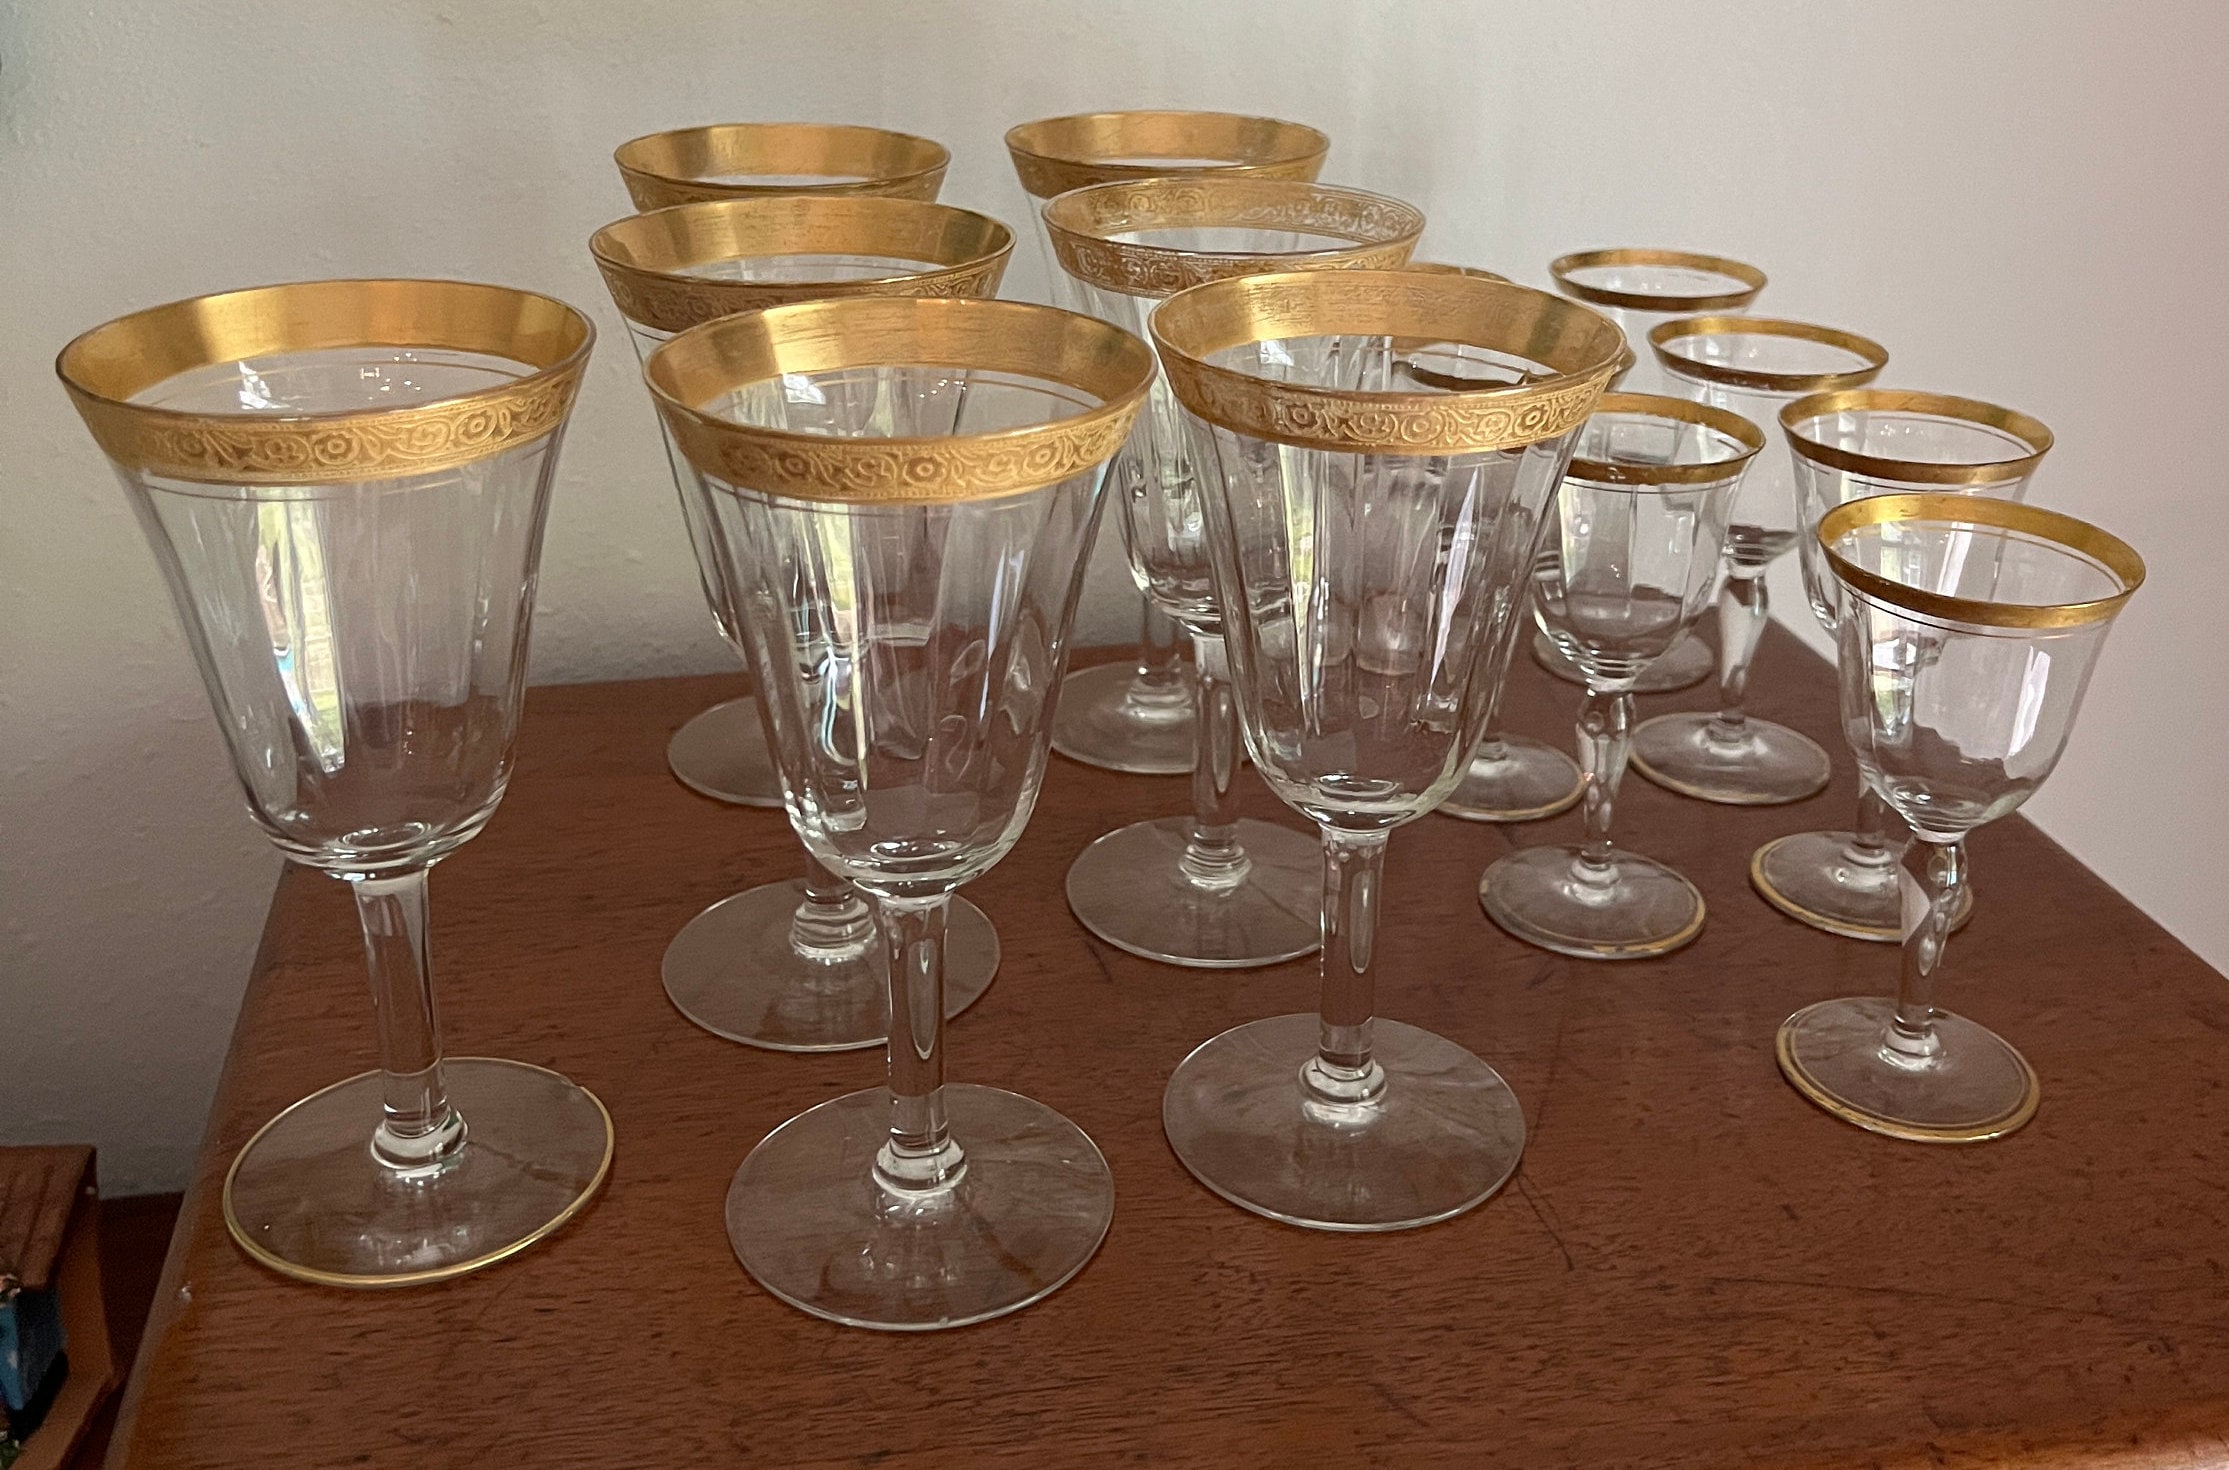 Shimmering Blue and Gold Wine Glass Set - Decorative Gift for